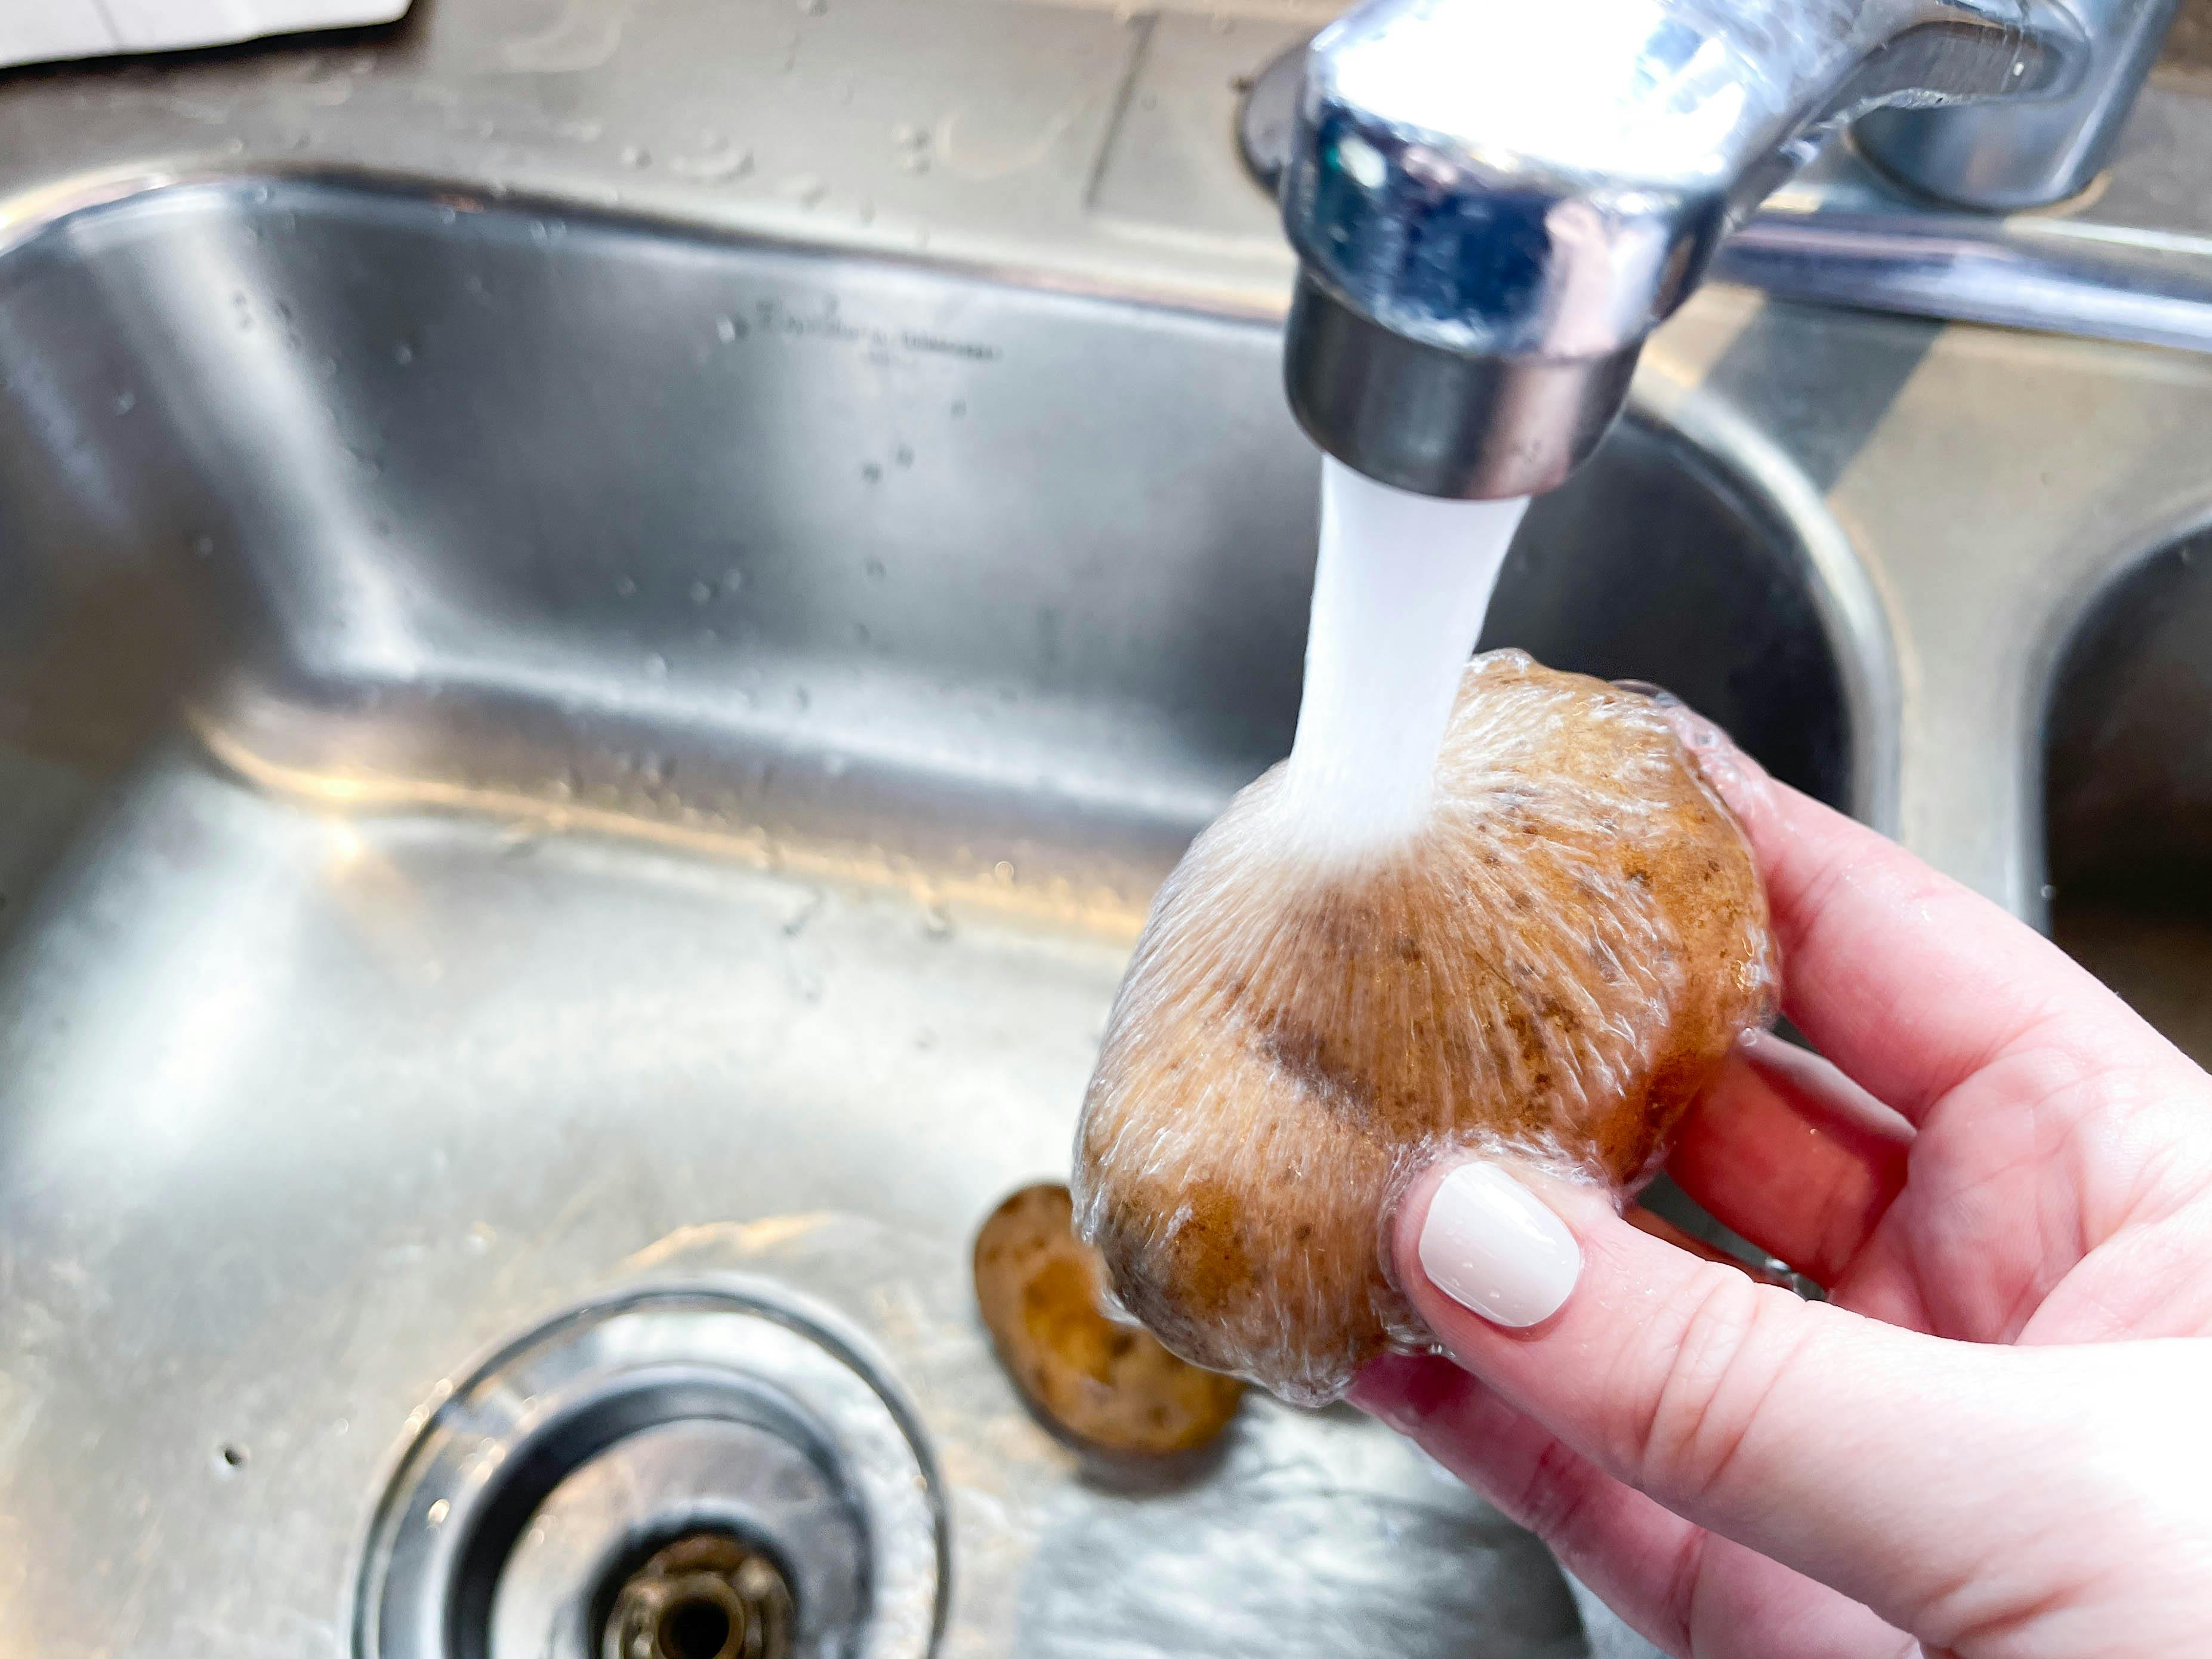 washing a potato in the sink 